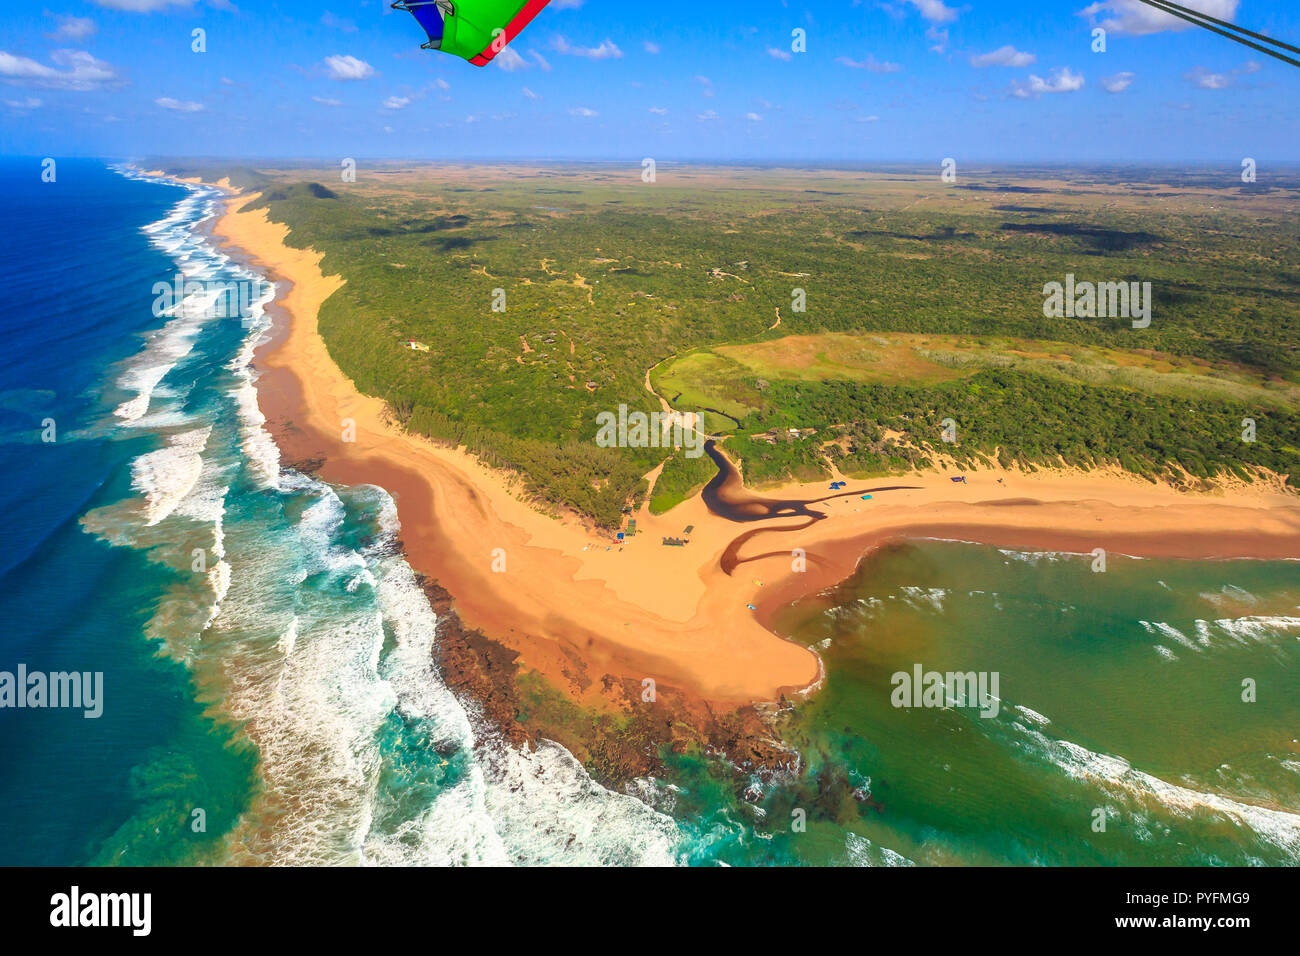 Aerial view of Sodwana Bay National Park within the iSimangaliso Wetland Park, Maputaland, an area of KwaZulu-Natal on the east coast of South Africa. Indian Ocean landscape. Stock Photo